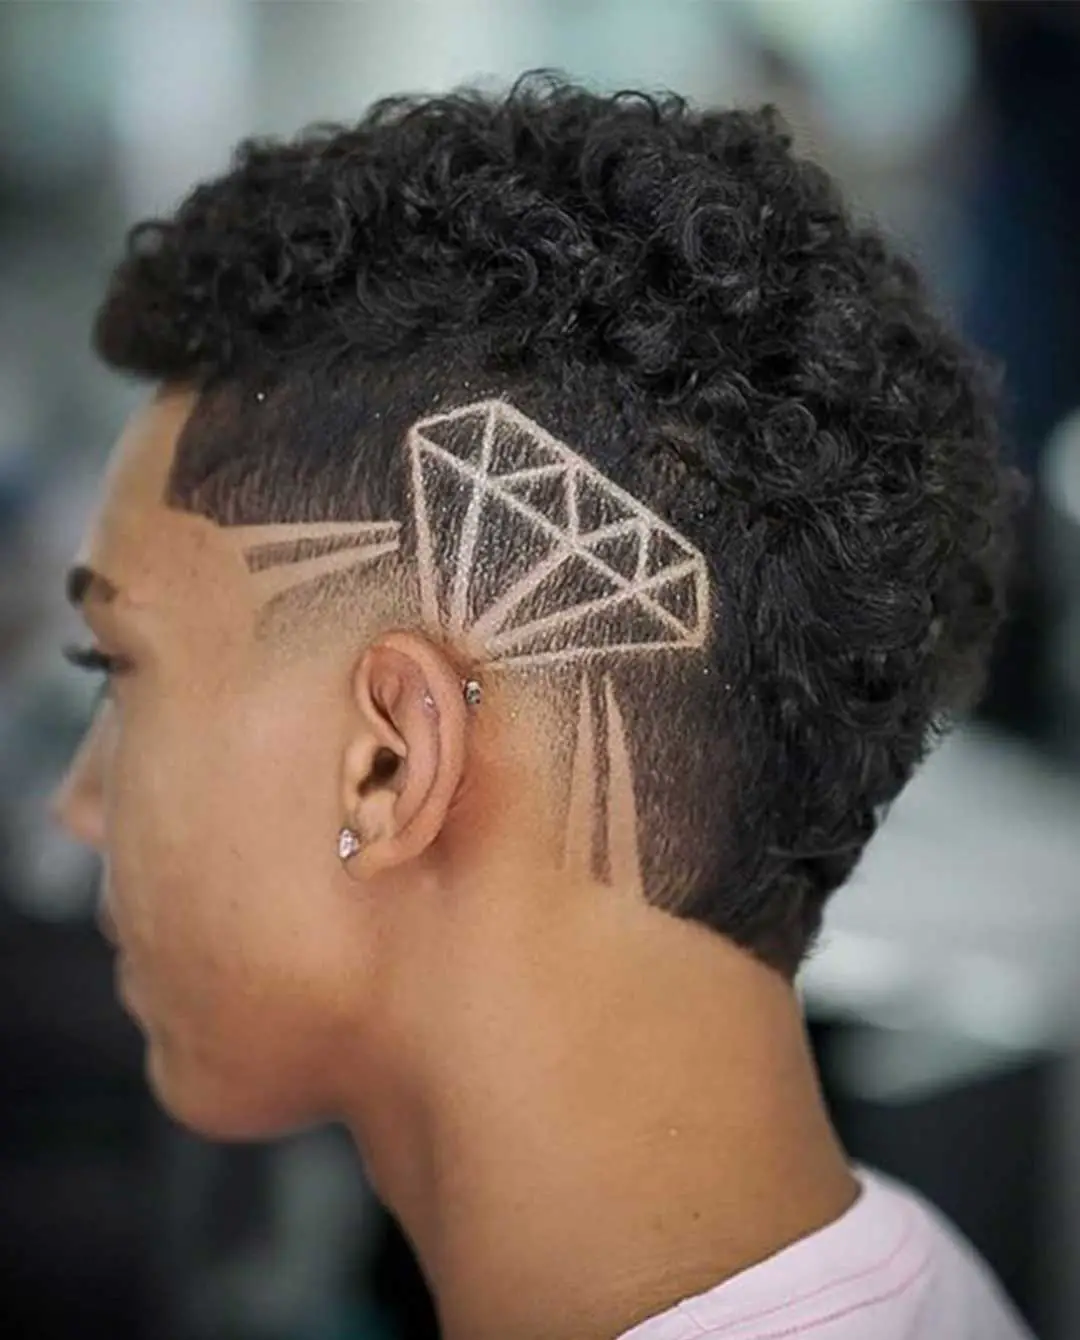 Curly Top with Diamond Design